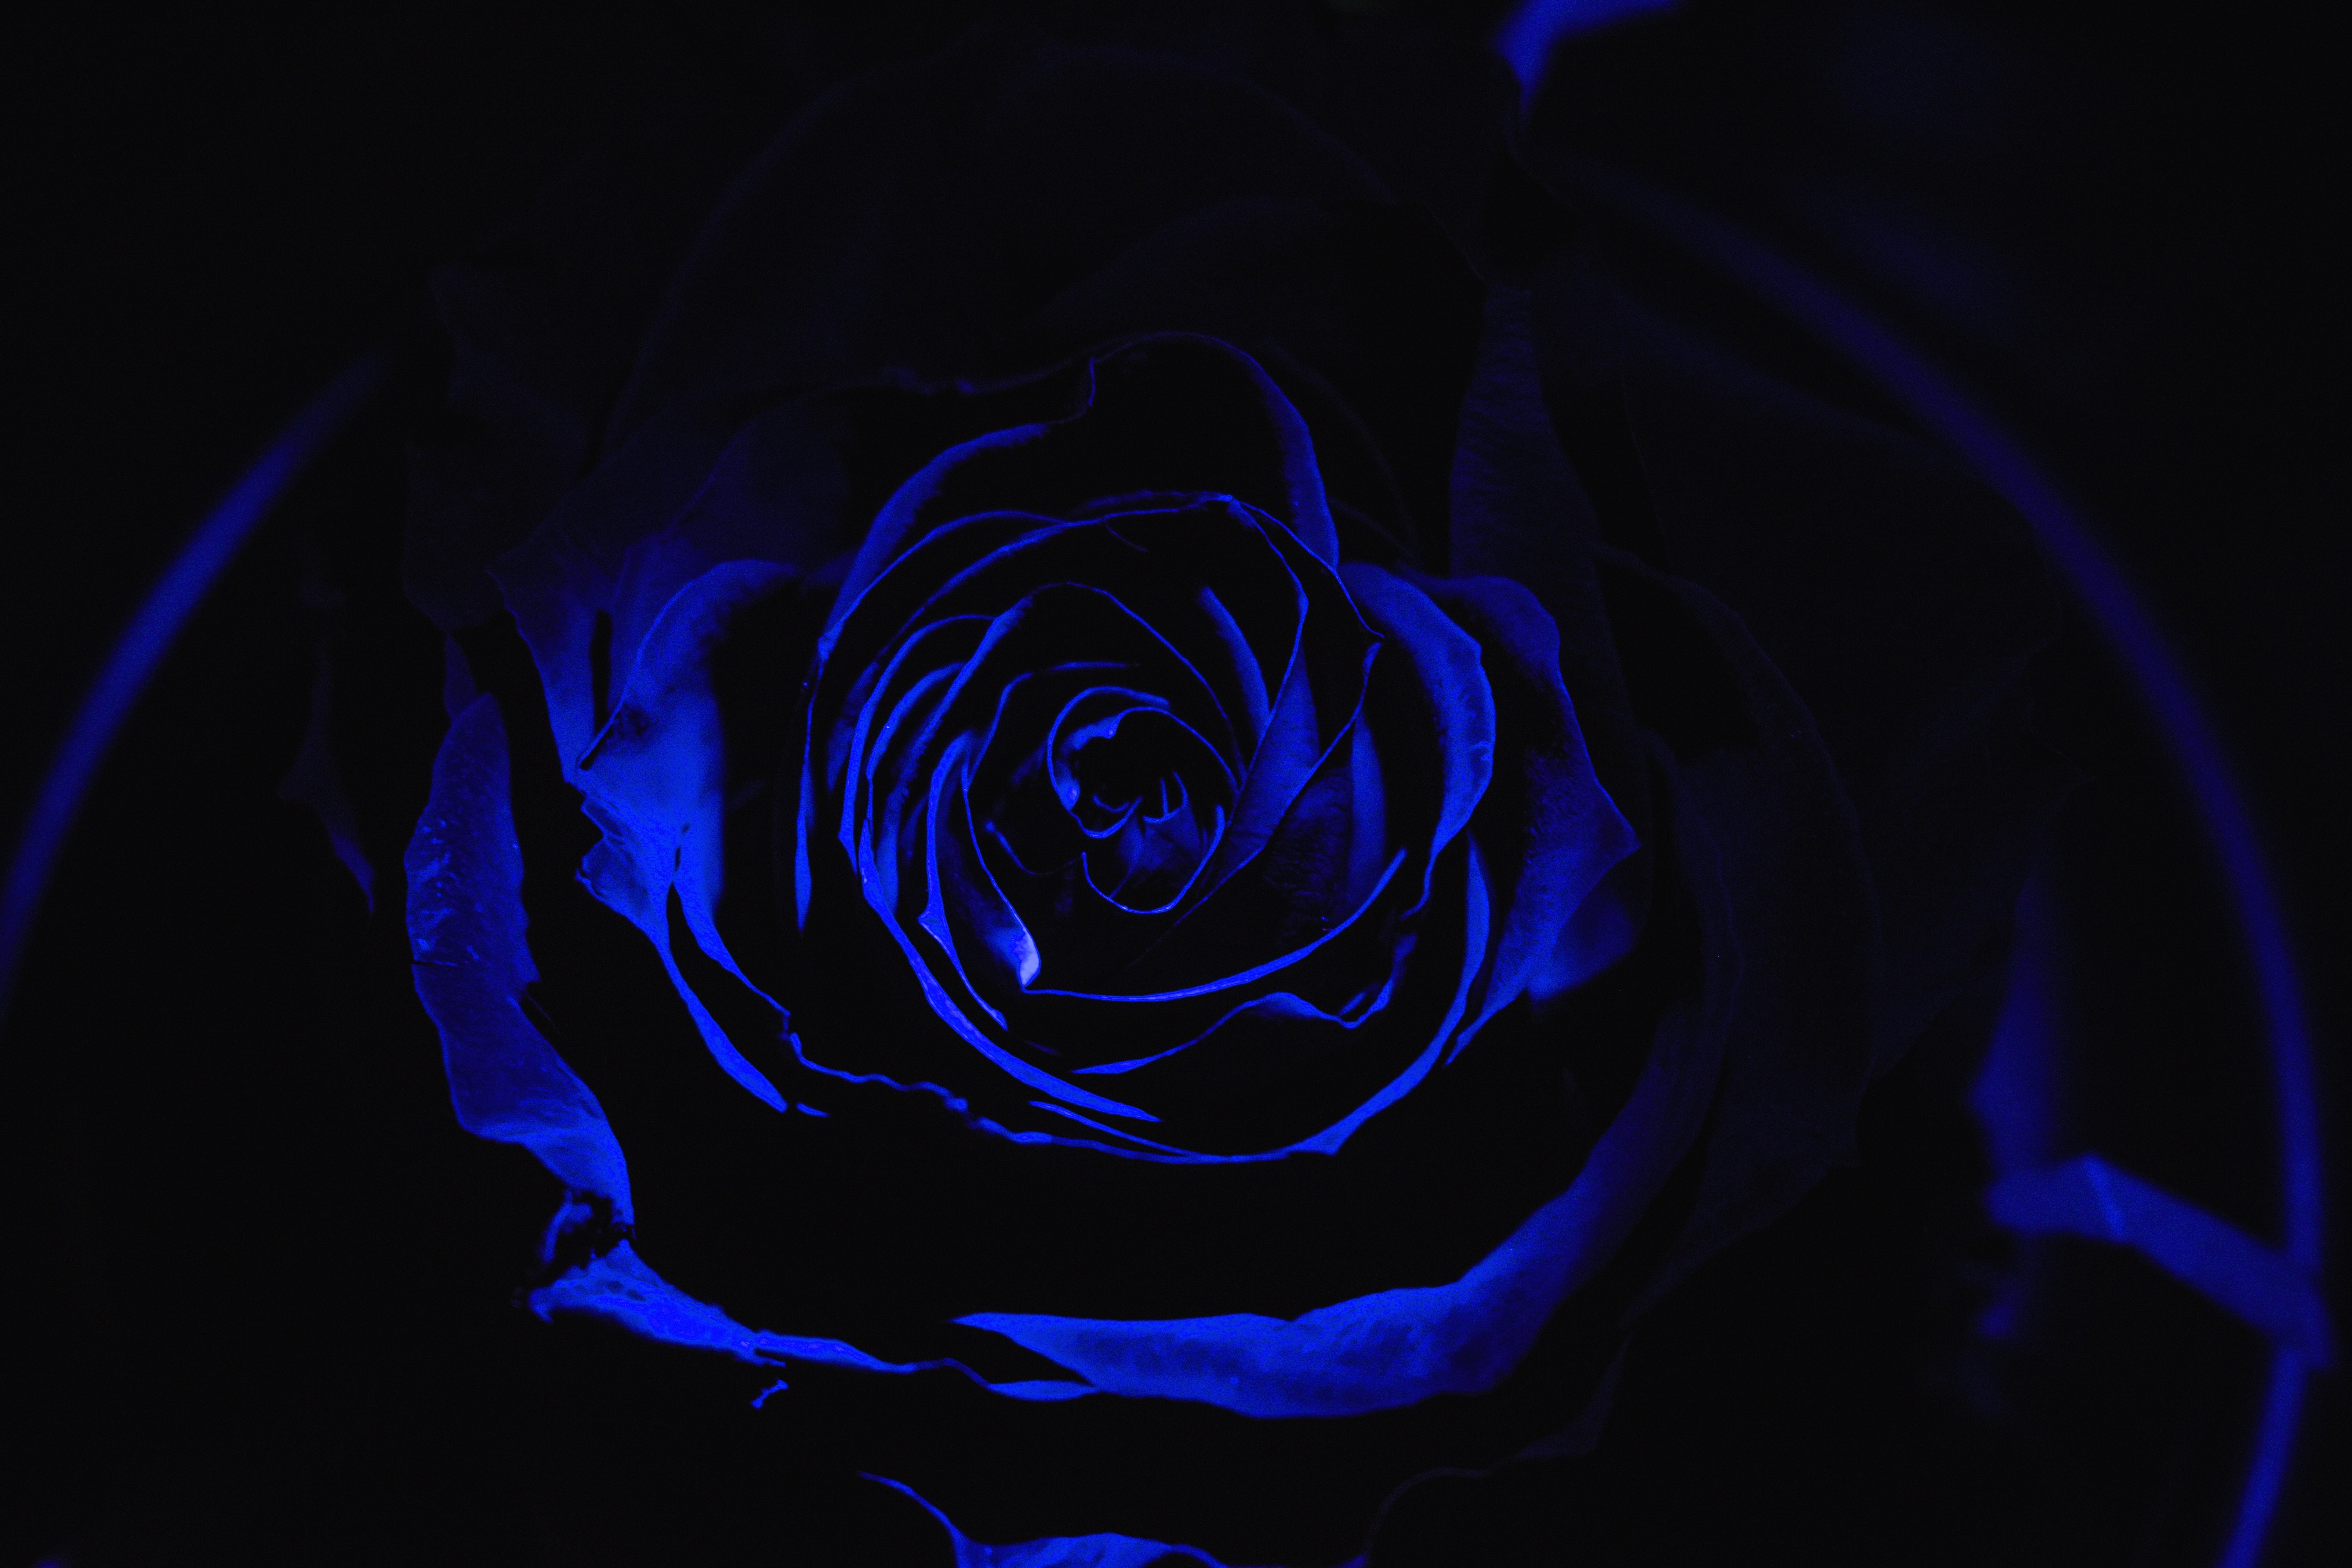 96414 download wallpaper rose flower, dark, rose, flowers, petals, bud, blue rose screensavers and pictures for free